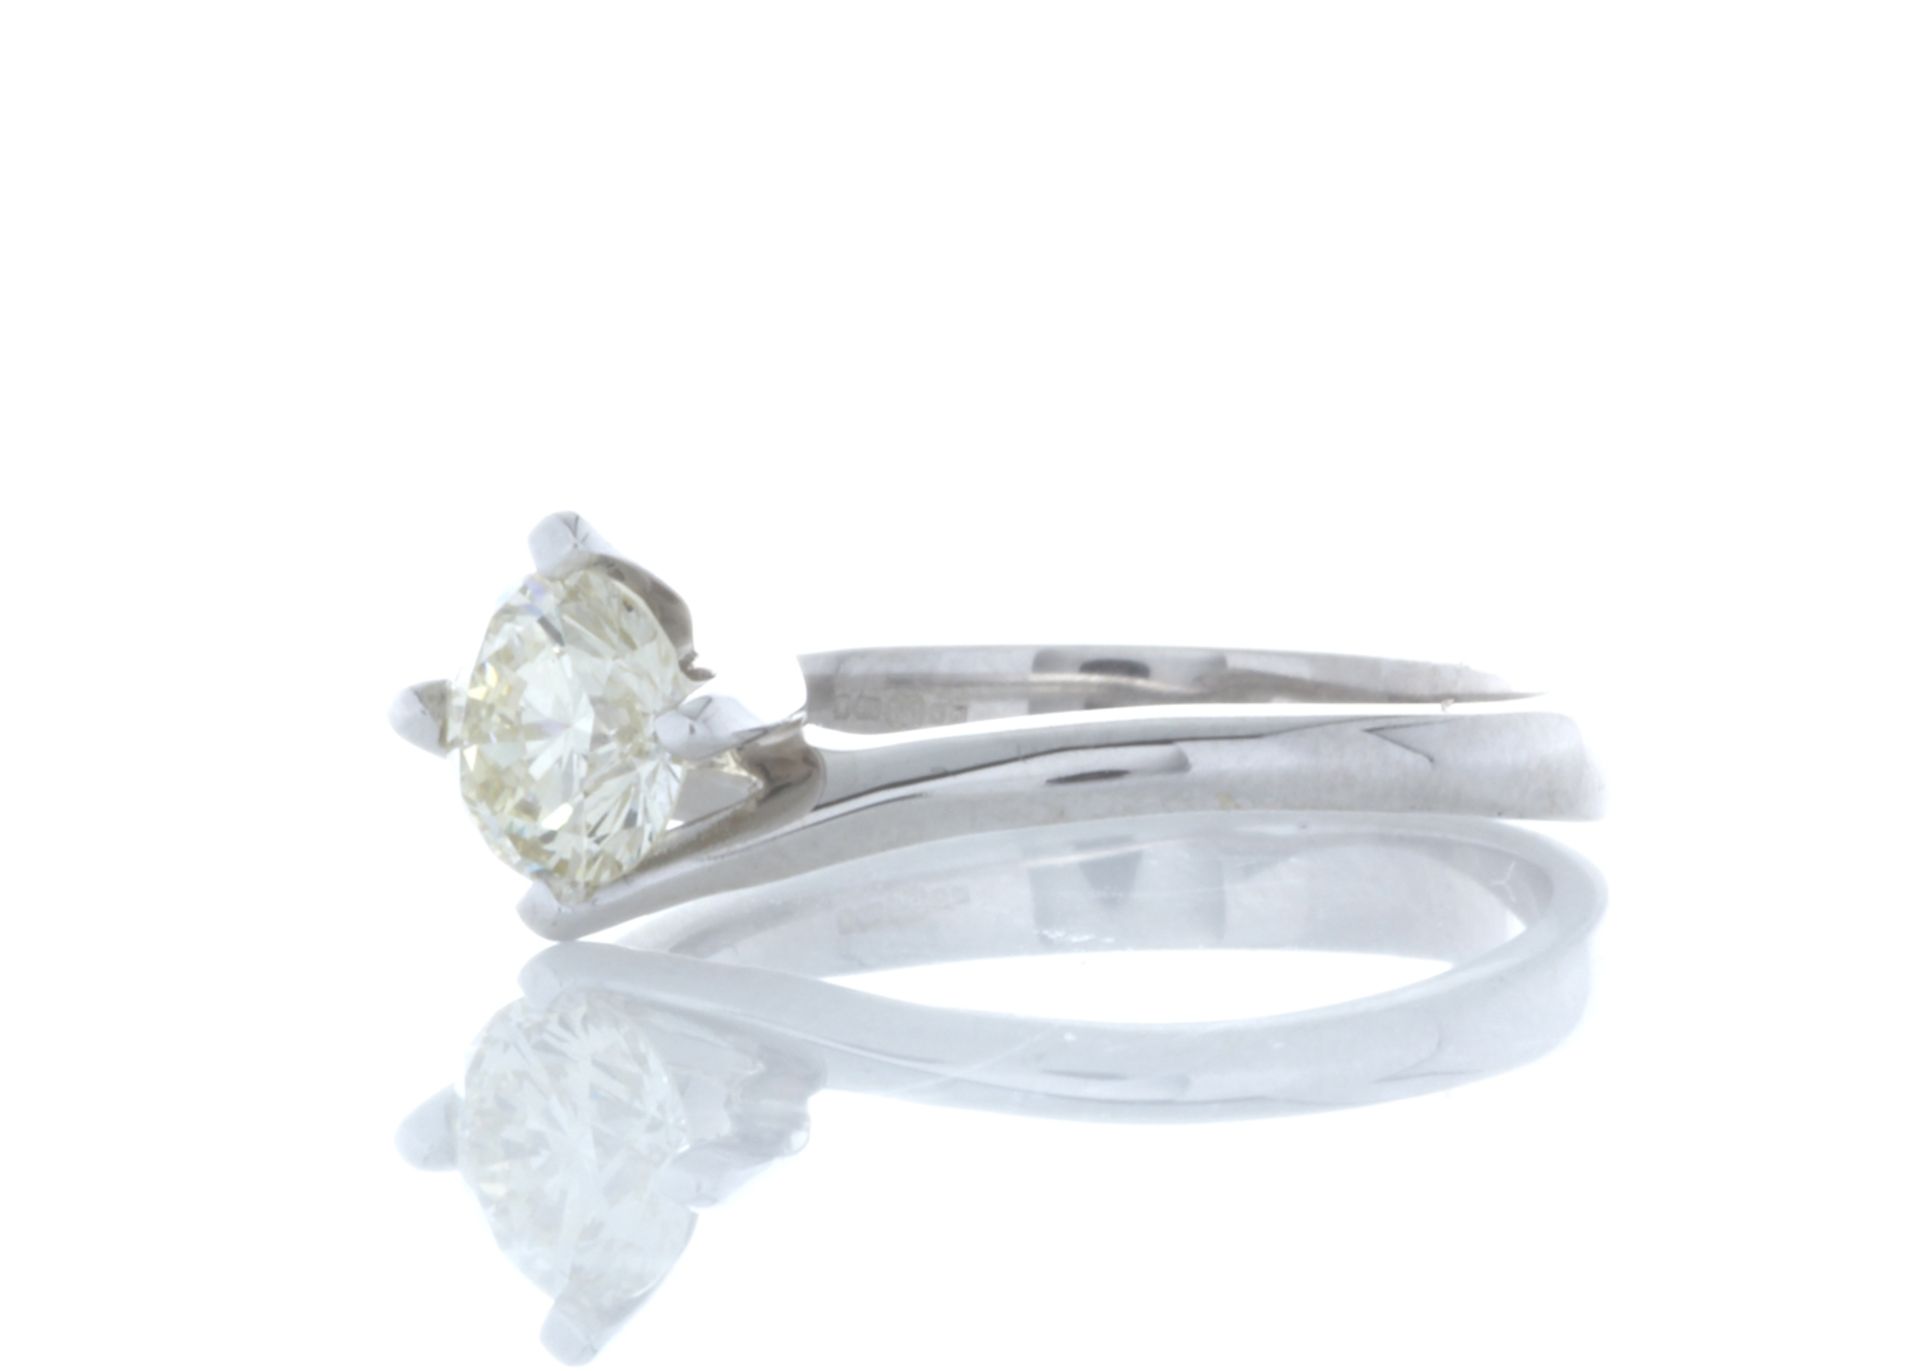 18ct White Gold Single Stone Fancy Claw Set Diamond Ring 0.71 Carats - Valued By IDI £12,875.00 - - Image 2 of 5